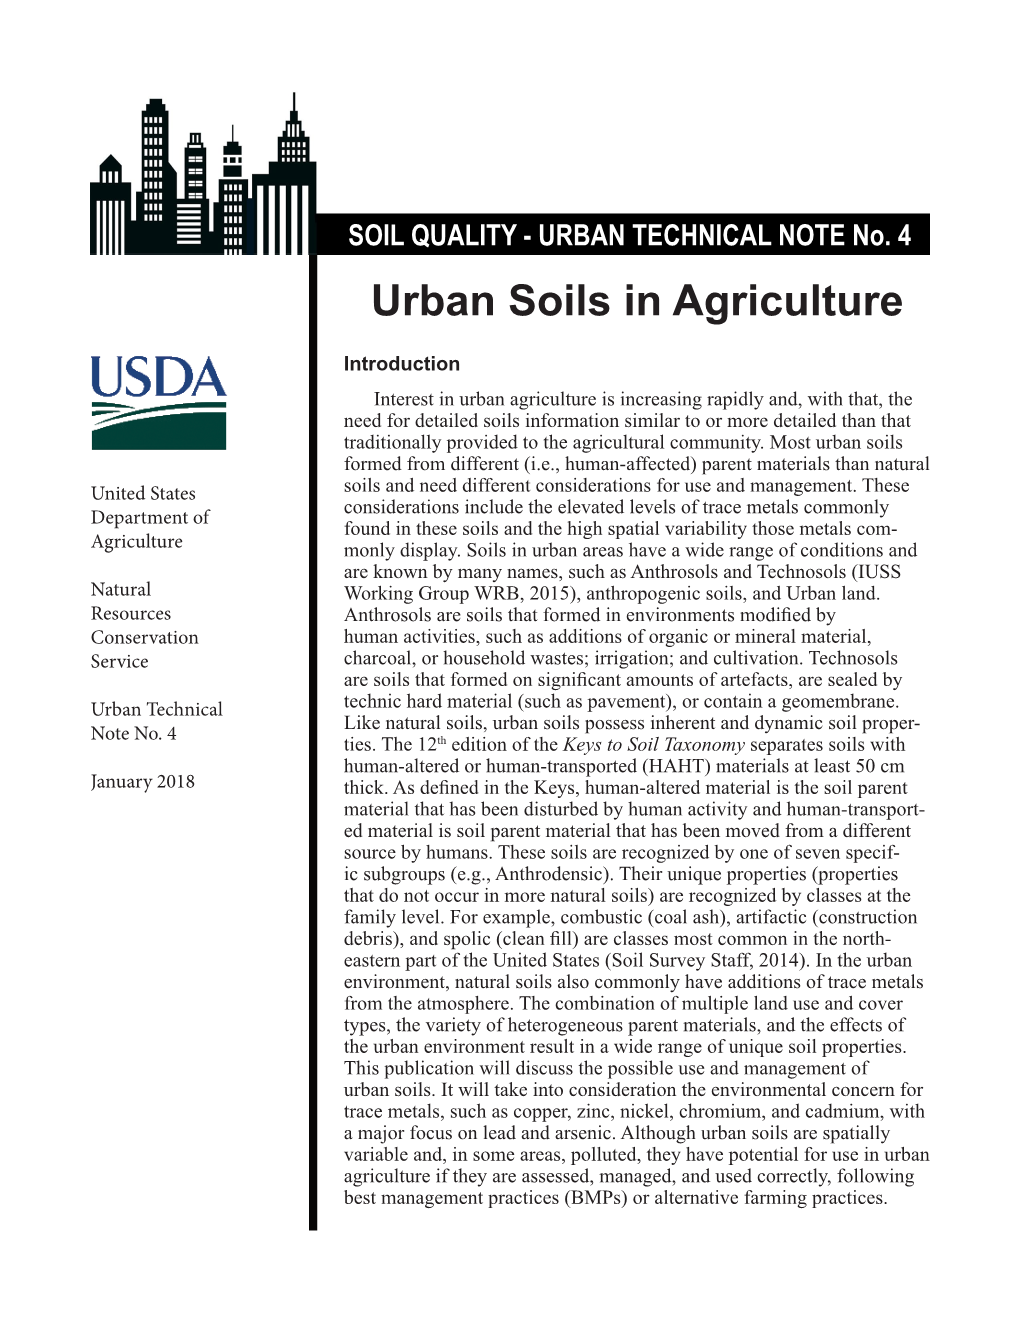 SOIL QUALITY - URBAN TECHNICAL NOTE No